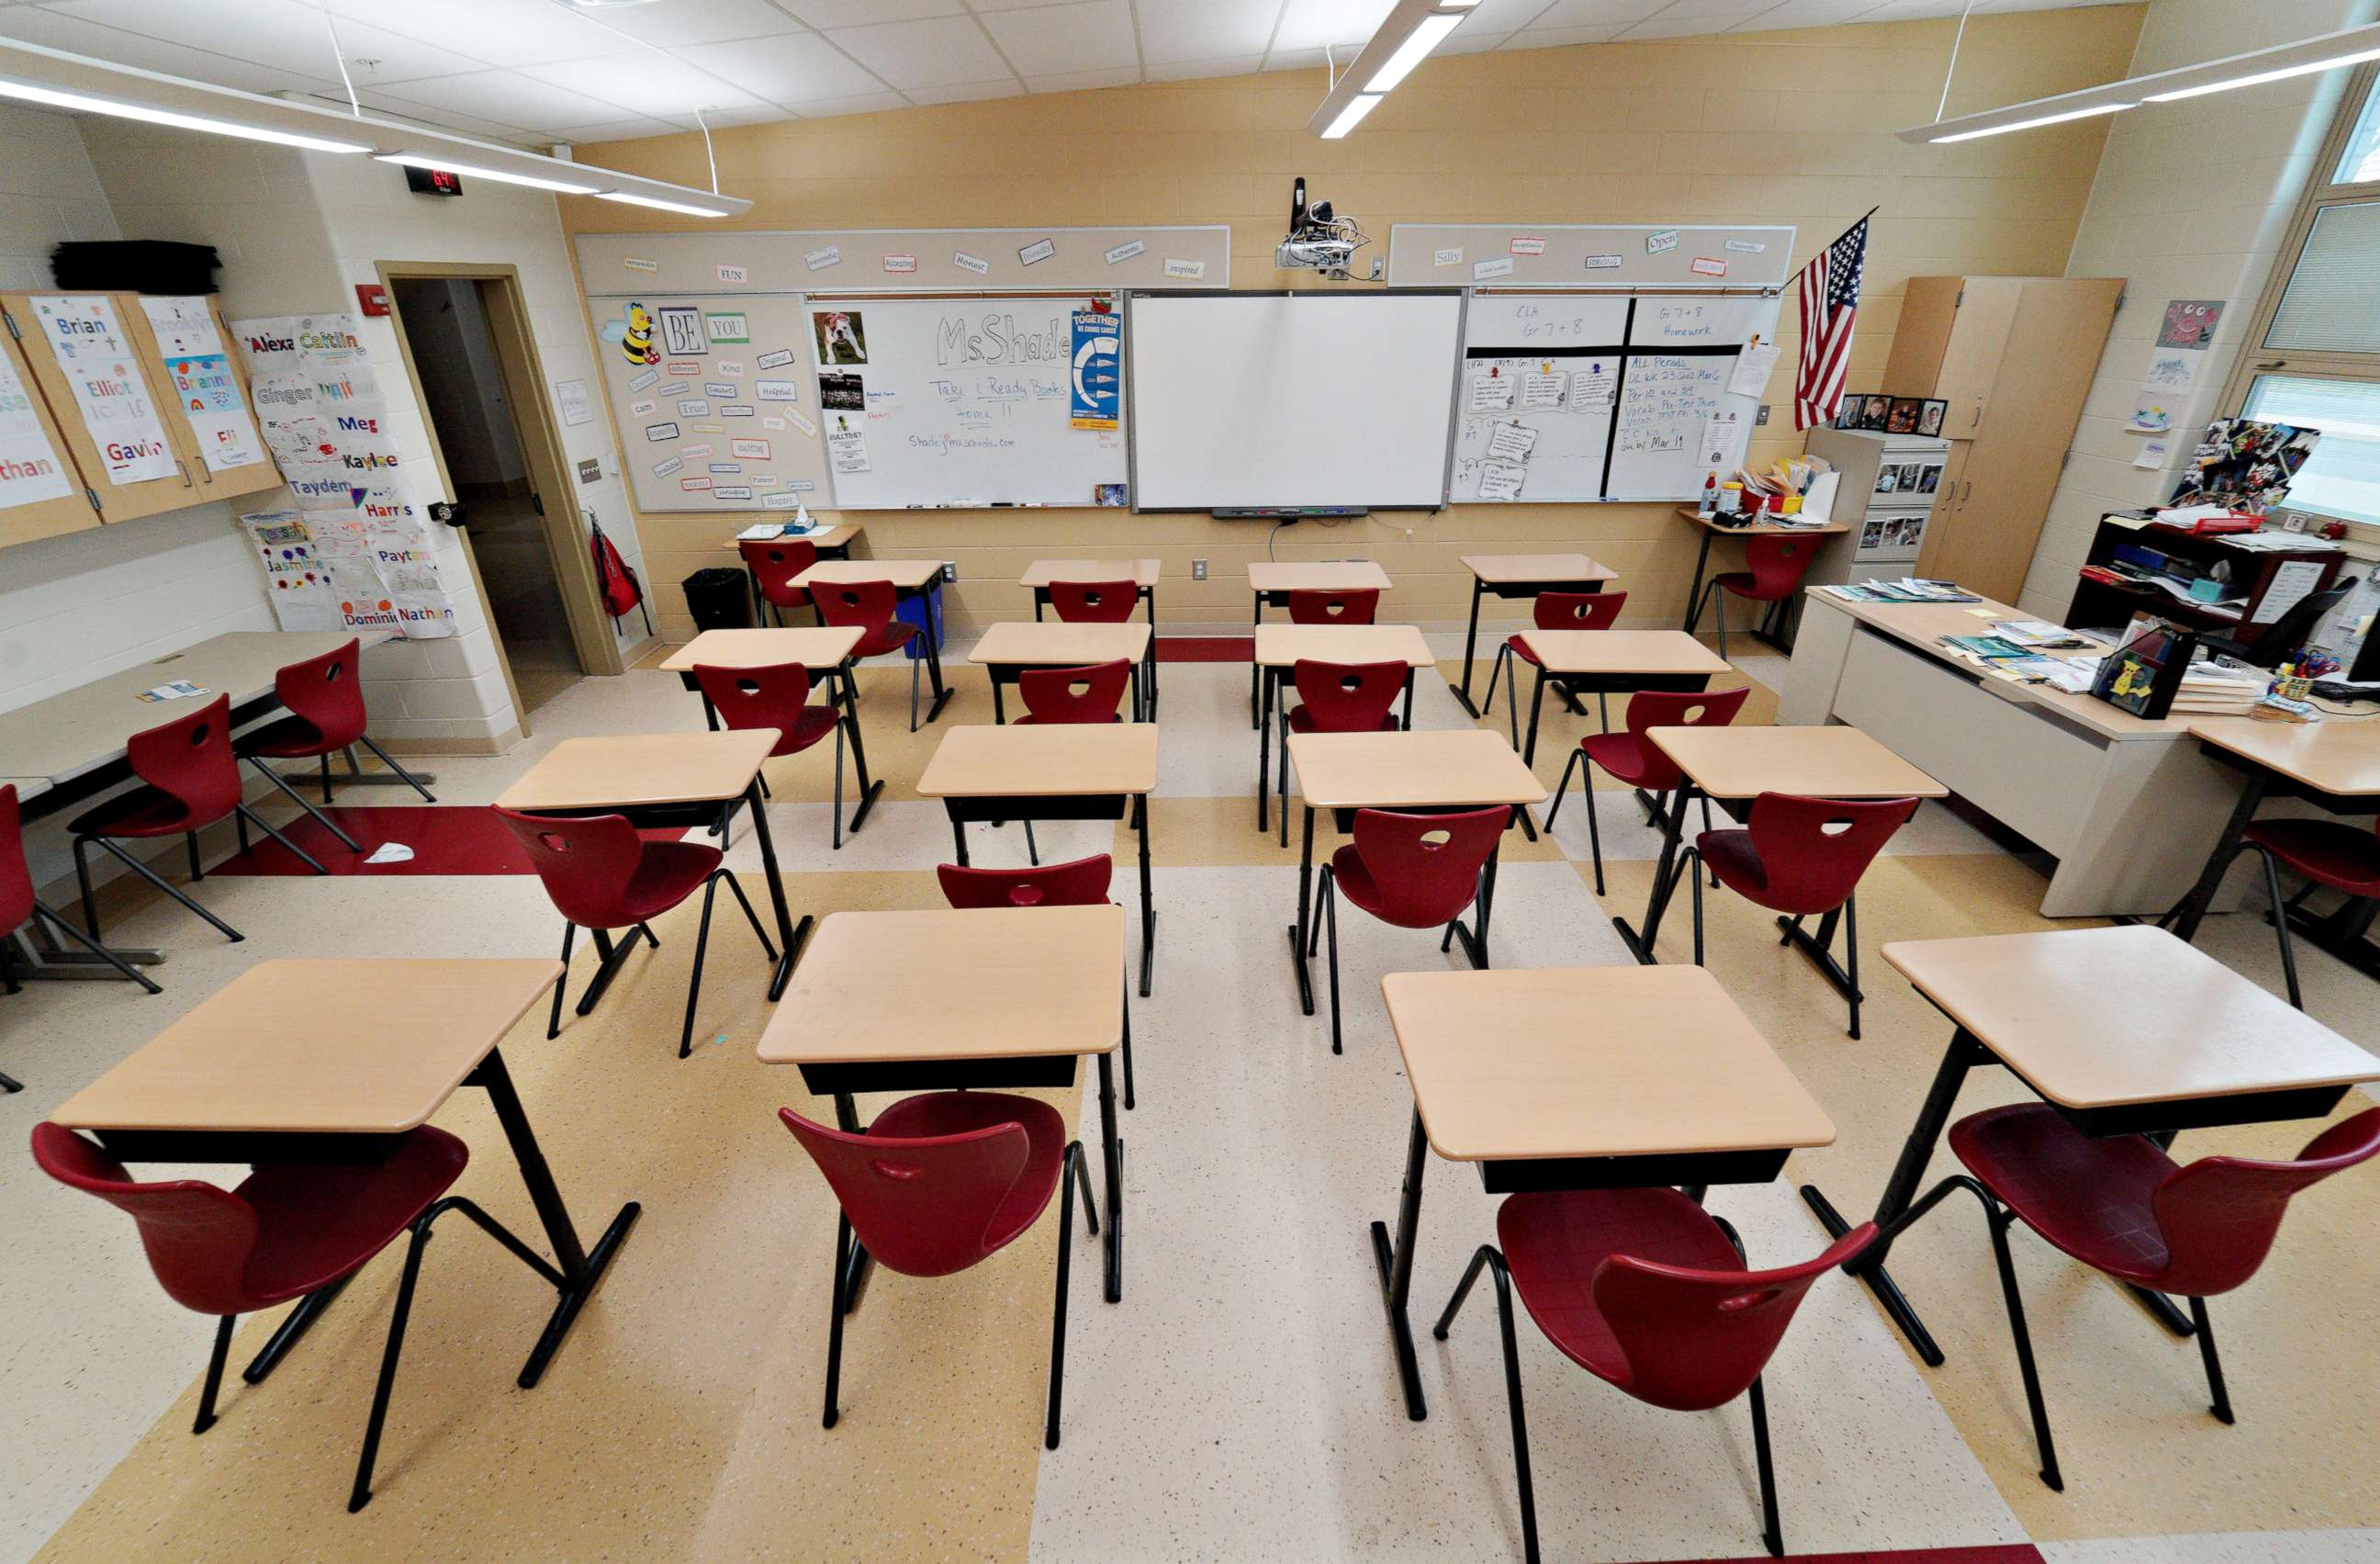 PHOTO: A classroom sits empty ahead of the statewide school closures in Ohio in an effort to curb the spread of the coronavirus, inside Milton-Union Exempted Village School District in West Milton, Ohio, March 13, 2020.